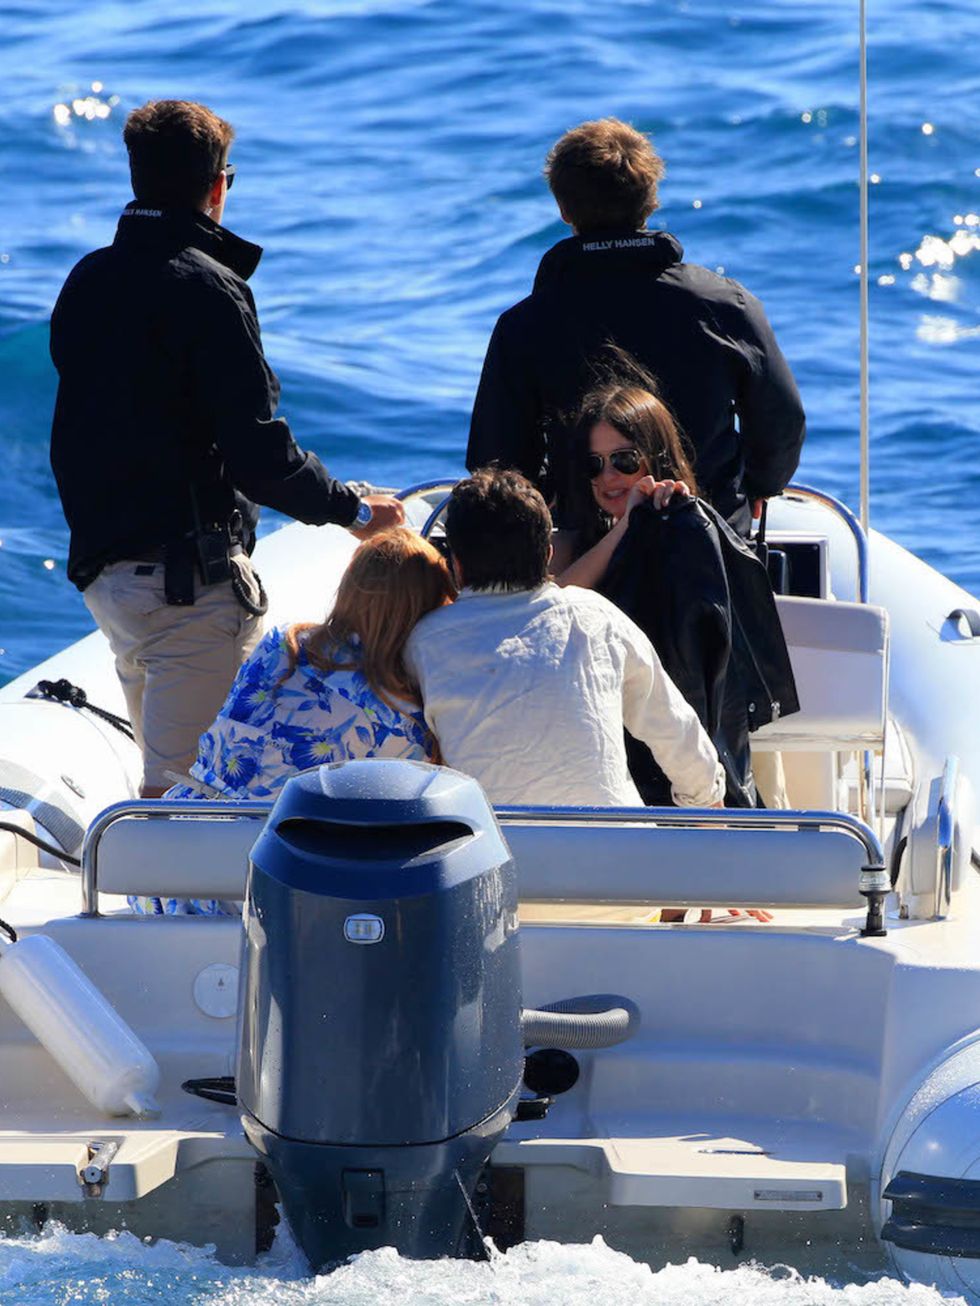 Lindsay Lohan goes yacht hopping in Cannes, looking loved up with her fiance Egor Tarabasov